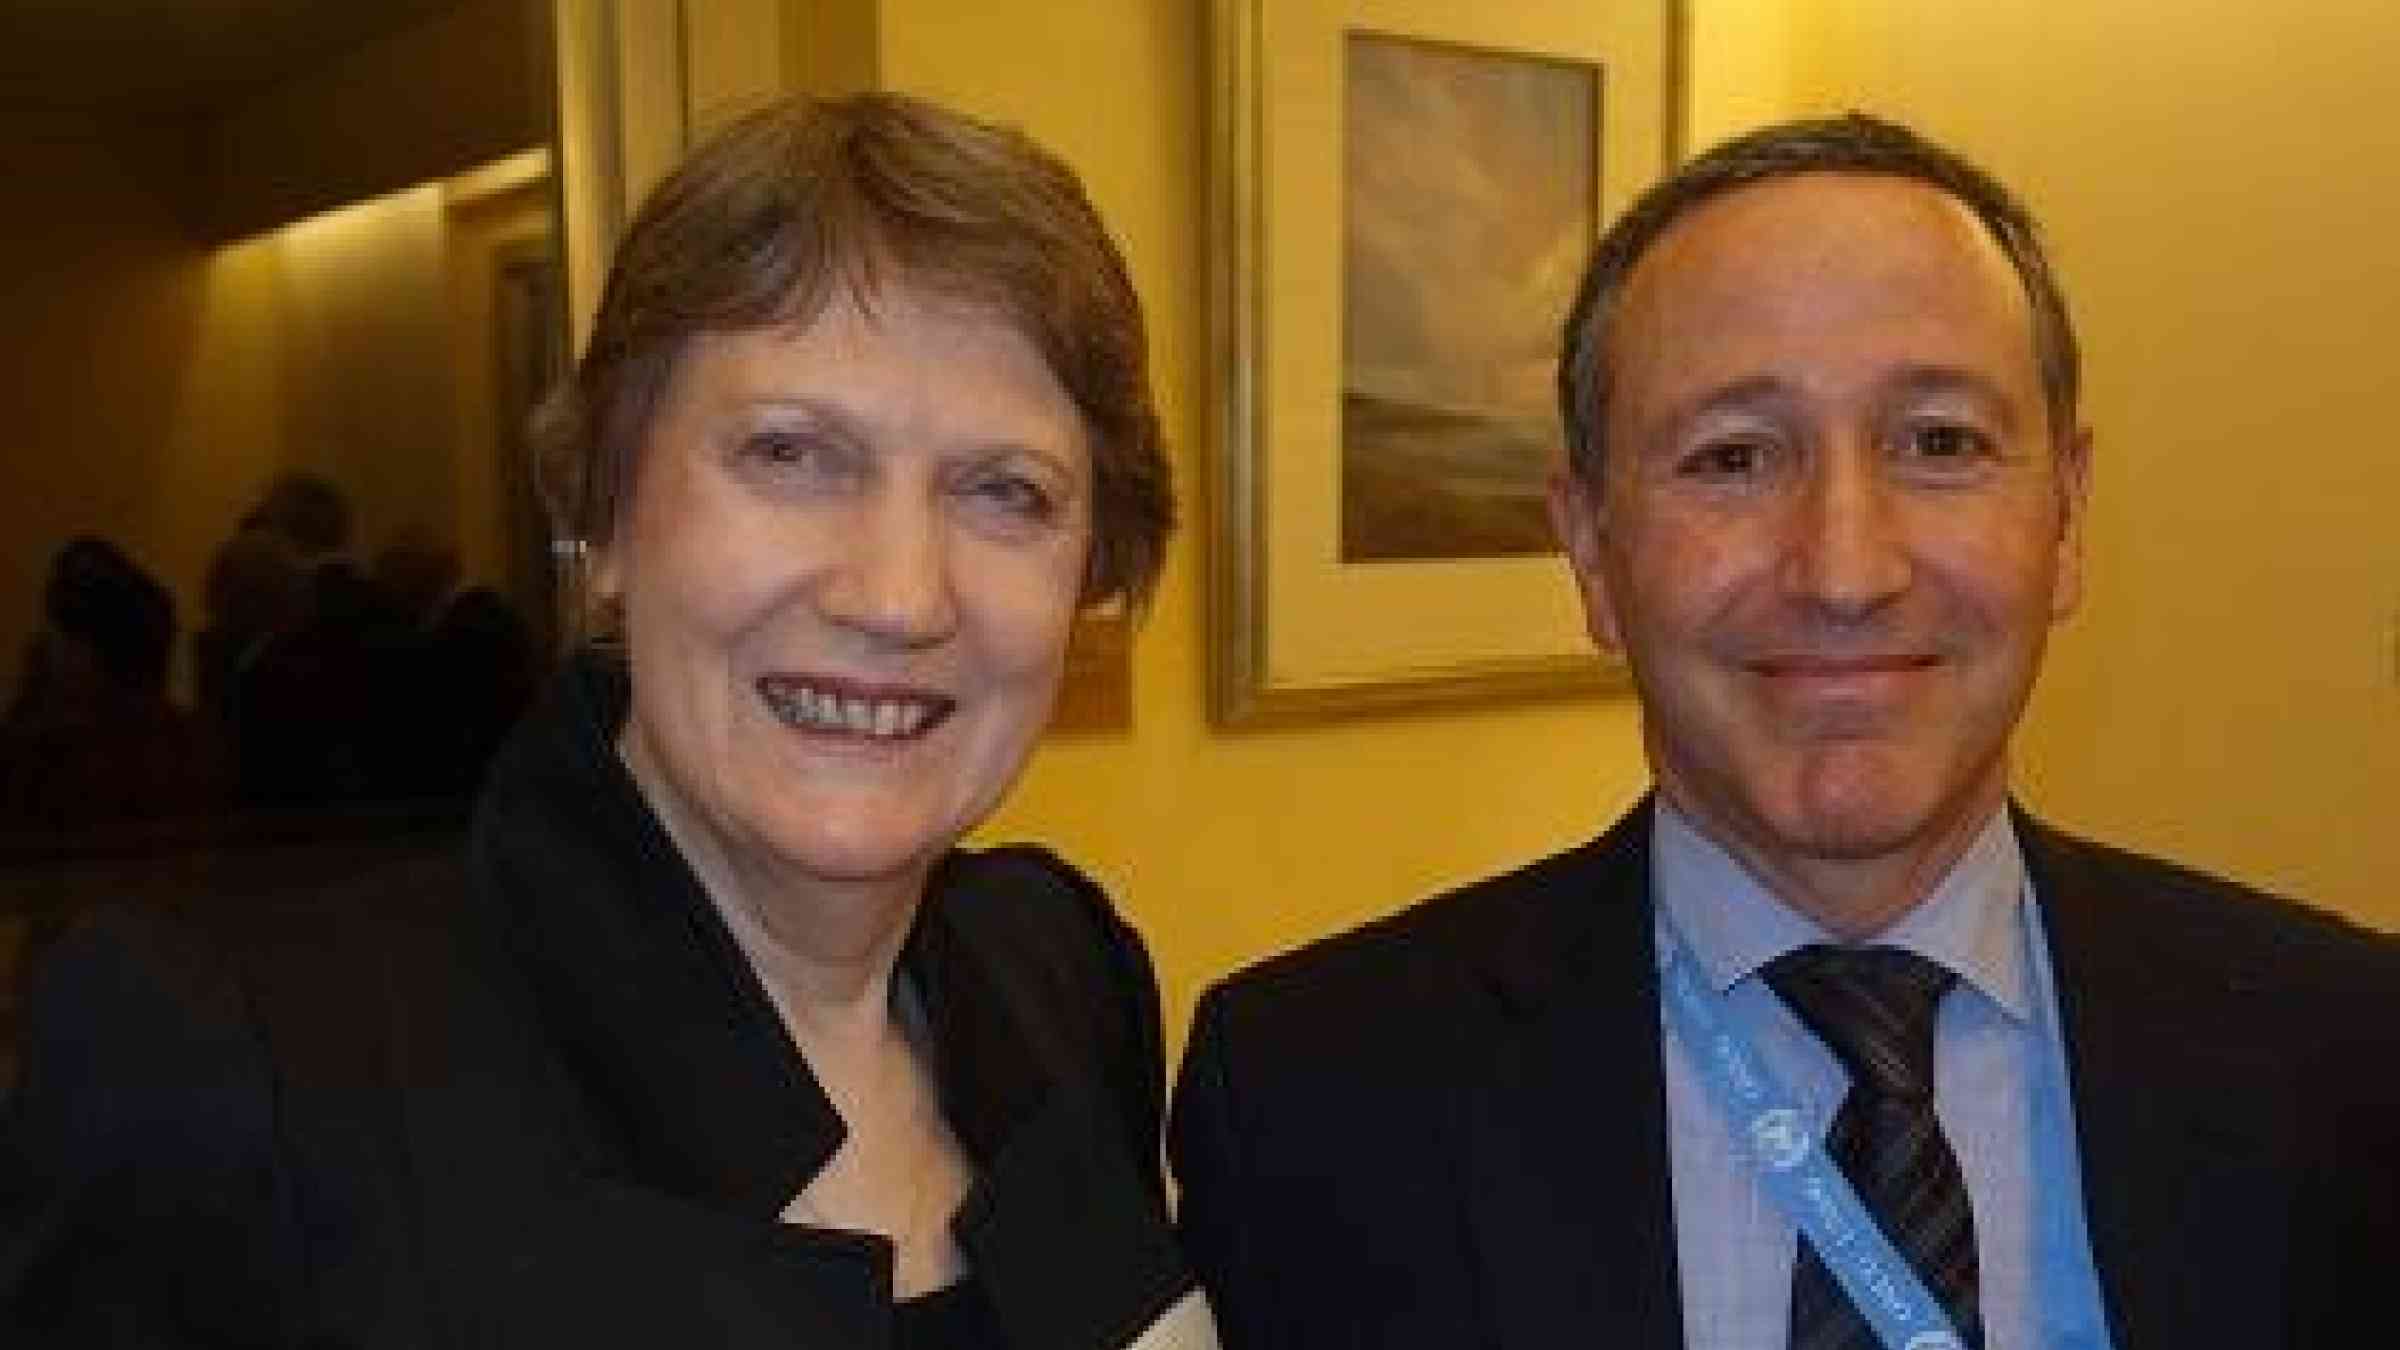 Dr. Robert Glasser, head of the UN Office for Disaster Risk Reduction, met with the leader of the UN Development Programme, Helen Clark, when he was sworn in this week (Photo: UNISDR)